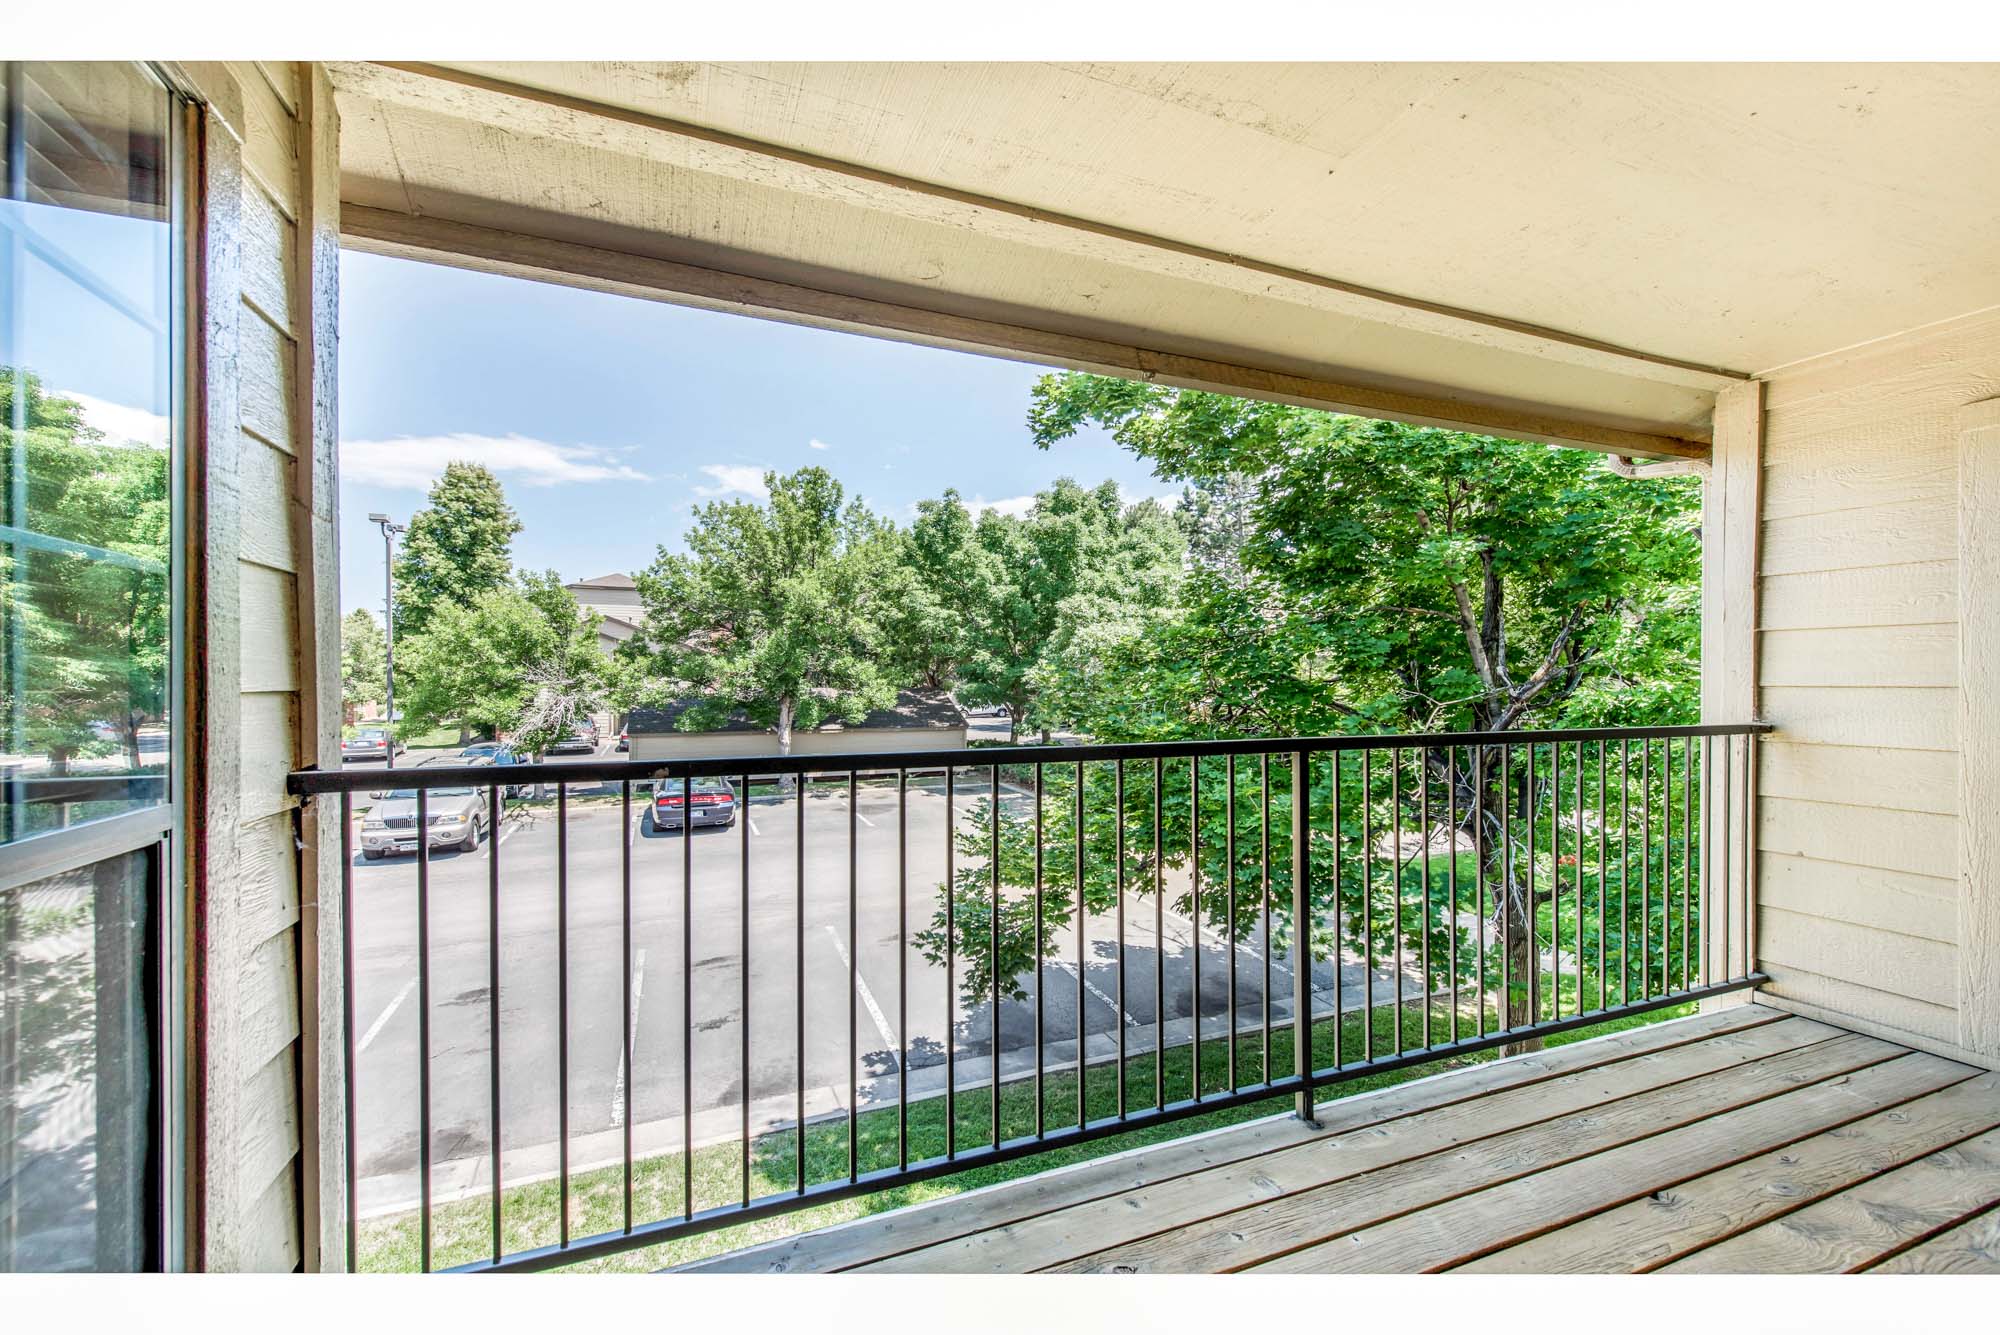 A balcony at Canyon Chase apartments in Westminster, CO.